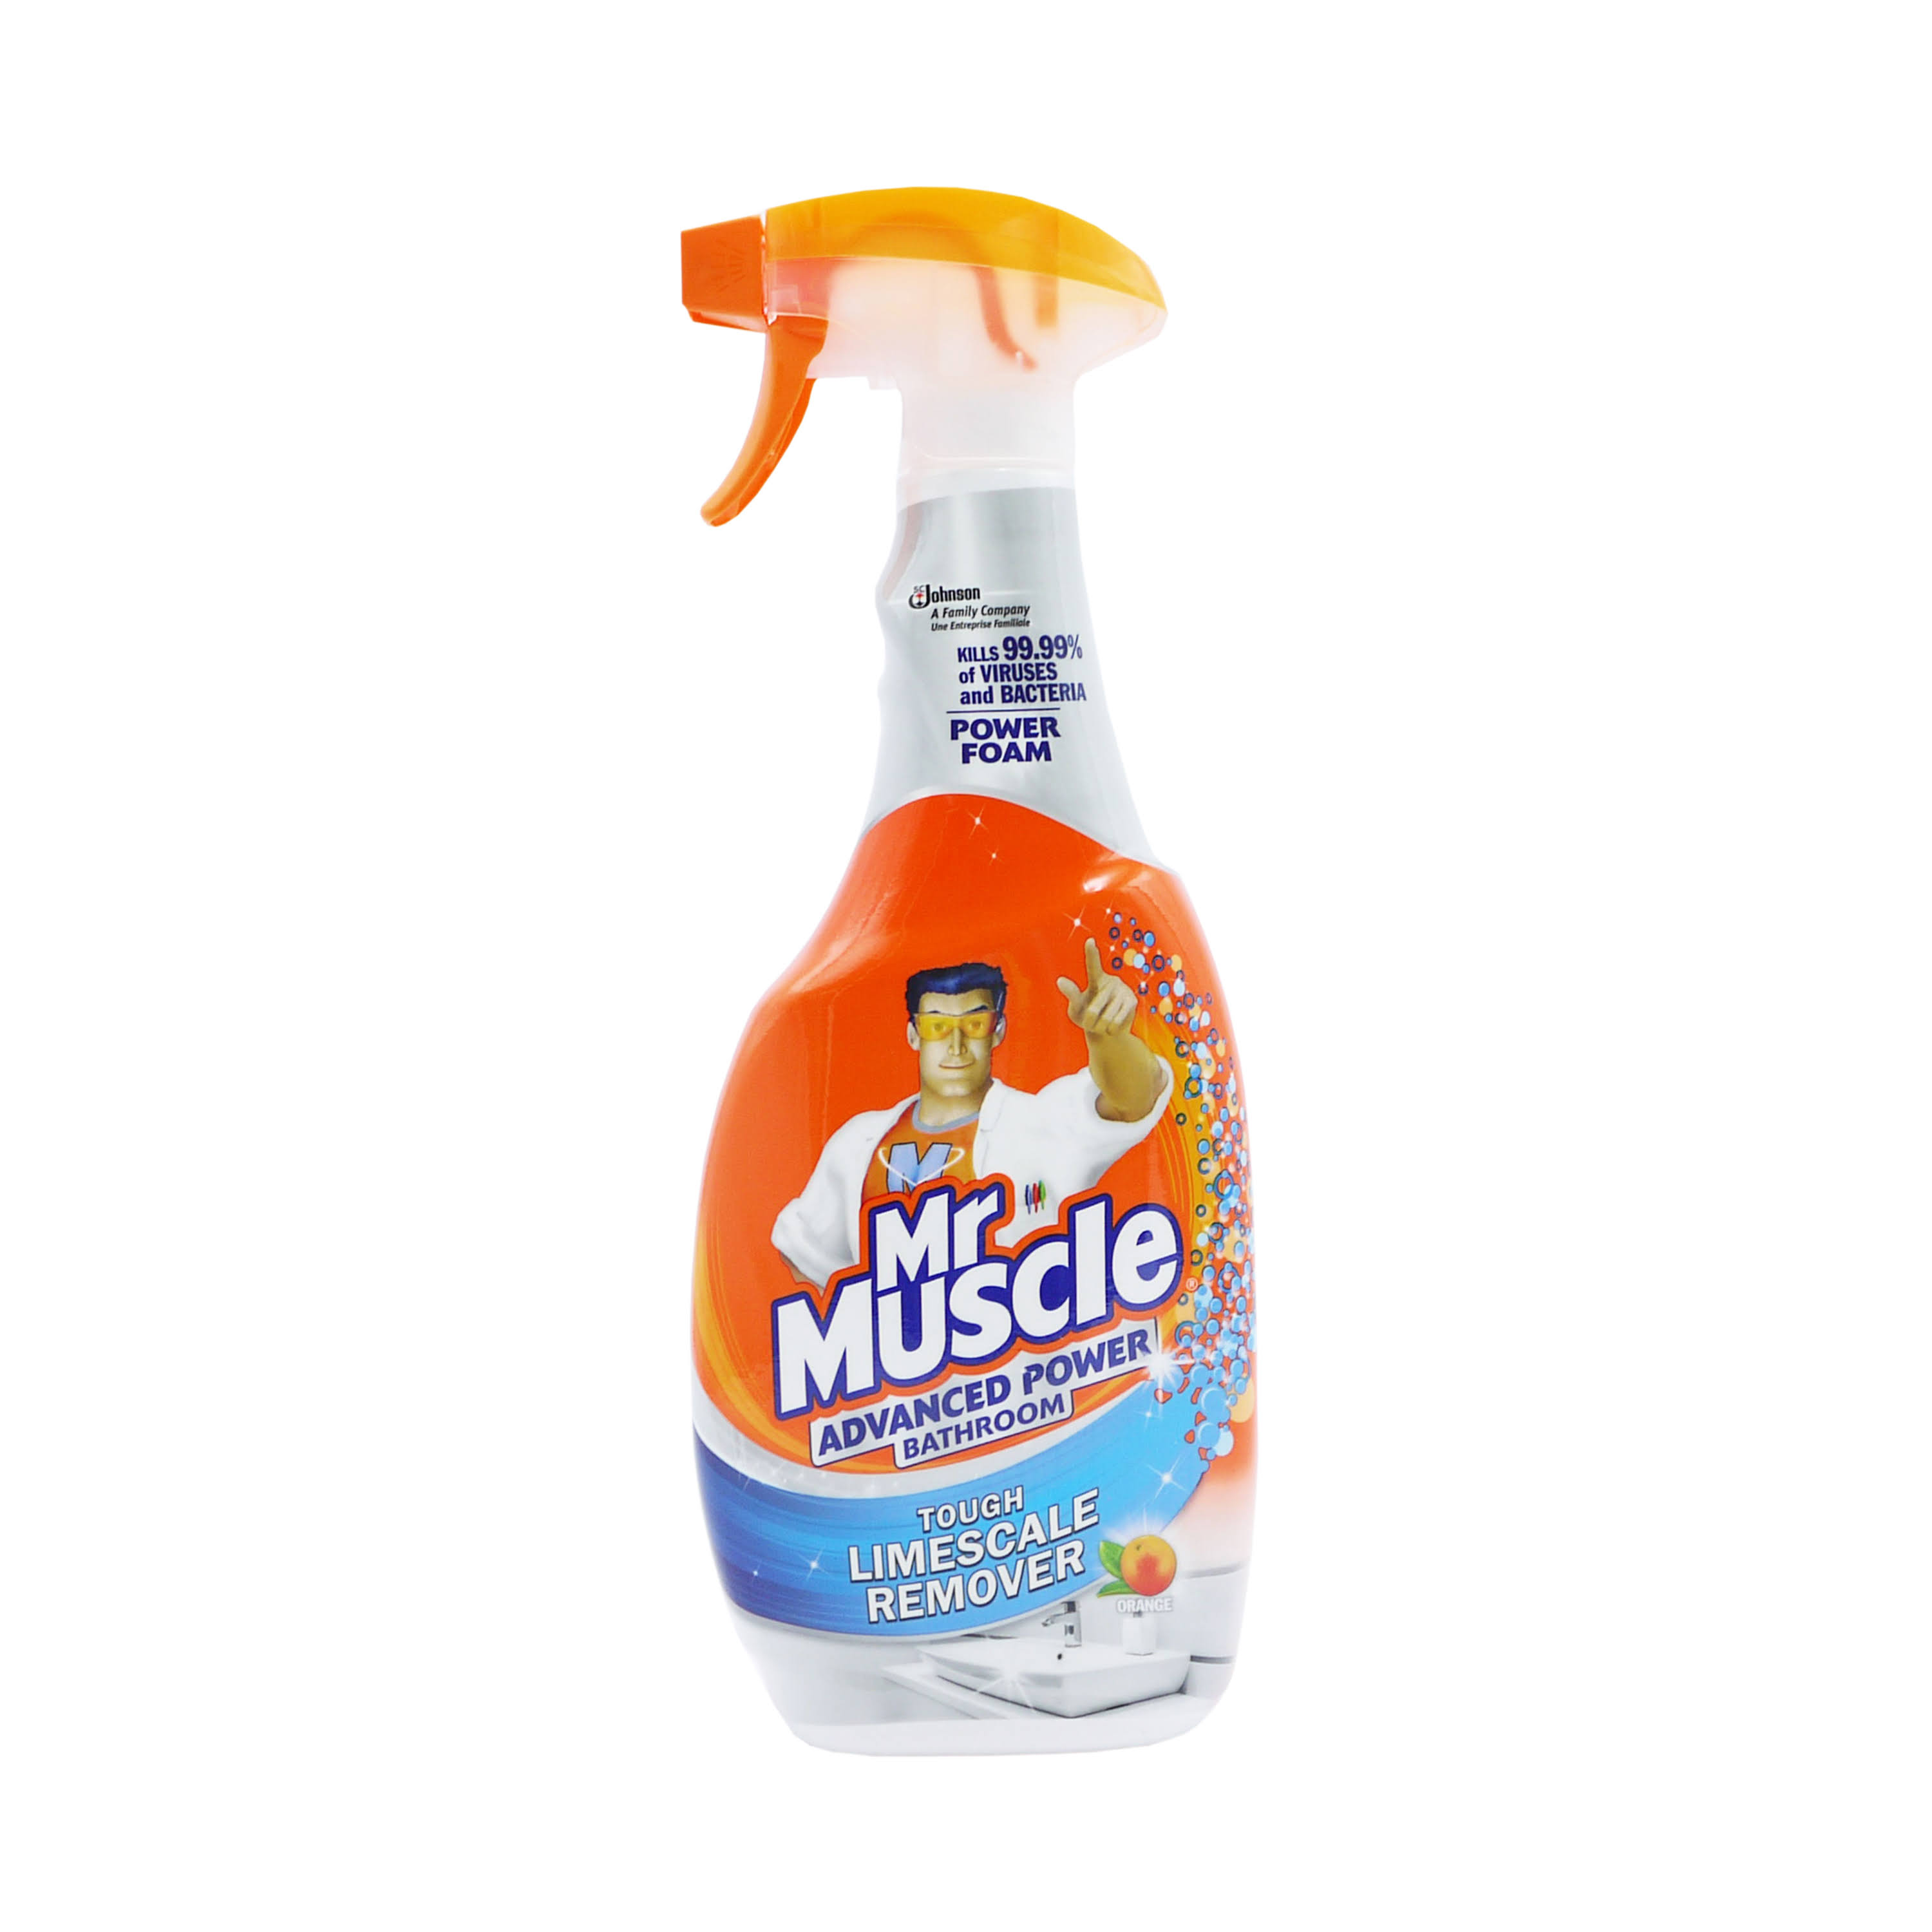 Mr Muscle Advanced Power Bathroom Trigger Cleaner Remove Grime 750ml